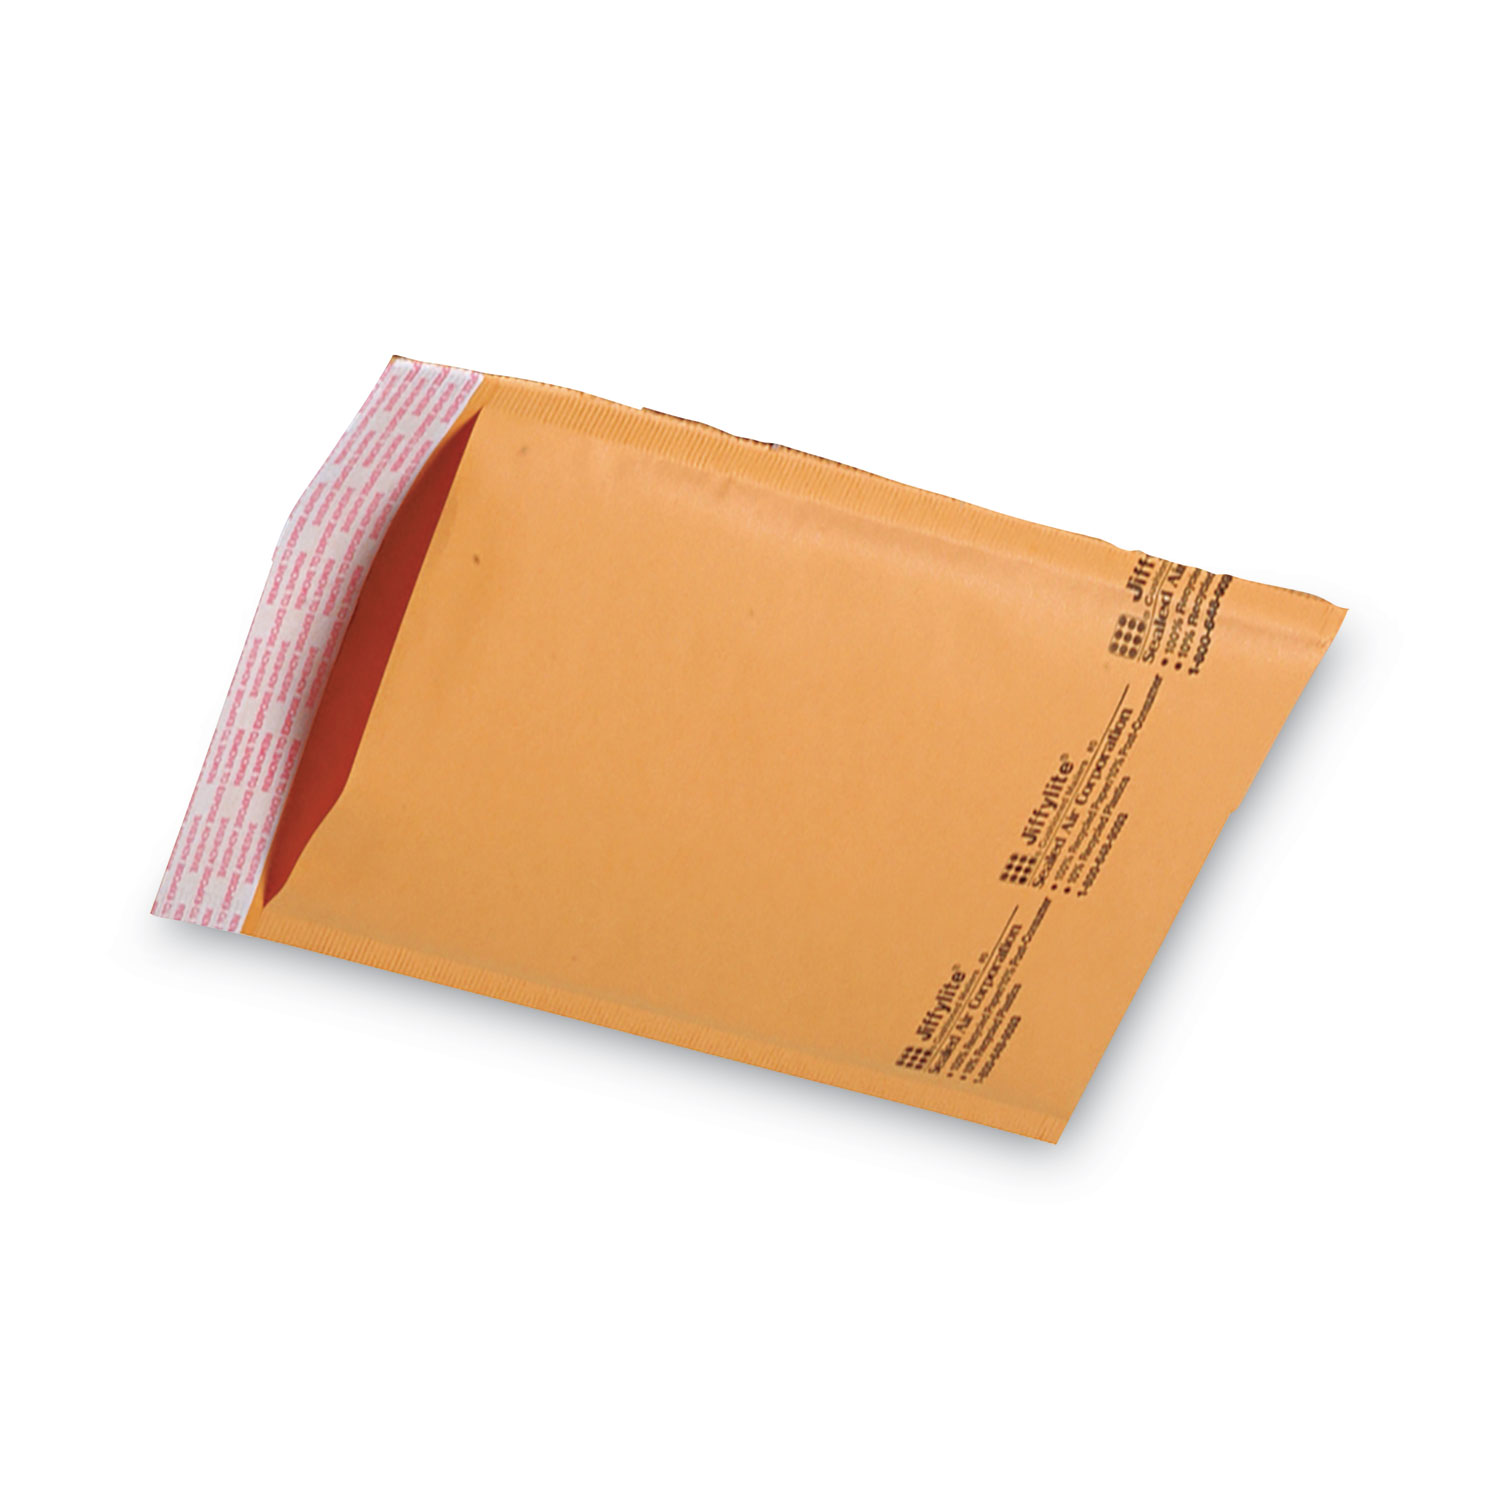 #3 Jiffylite Self Seal bubble lined Mailers  8.5" x 14.5" Pack of 25 Mailers 